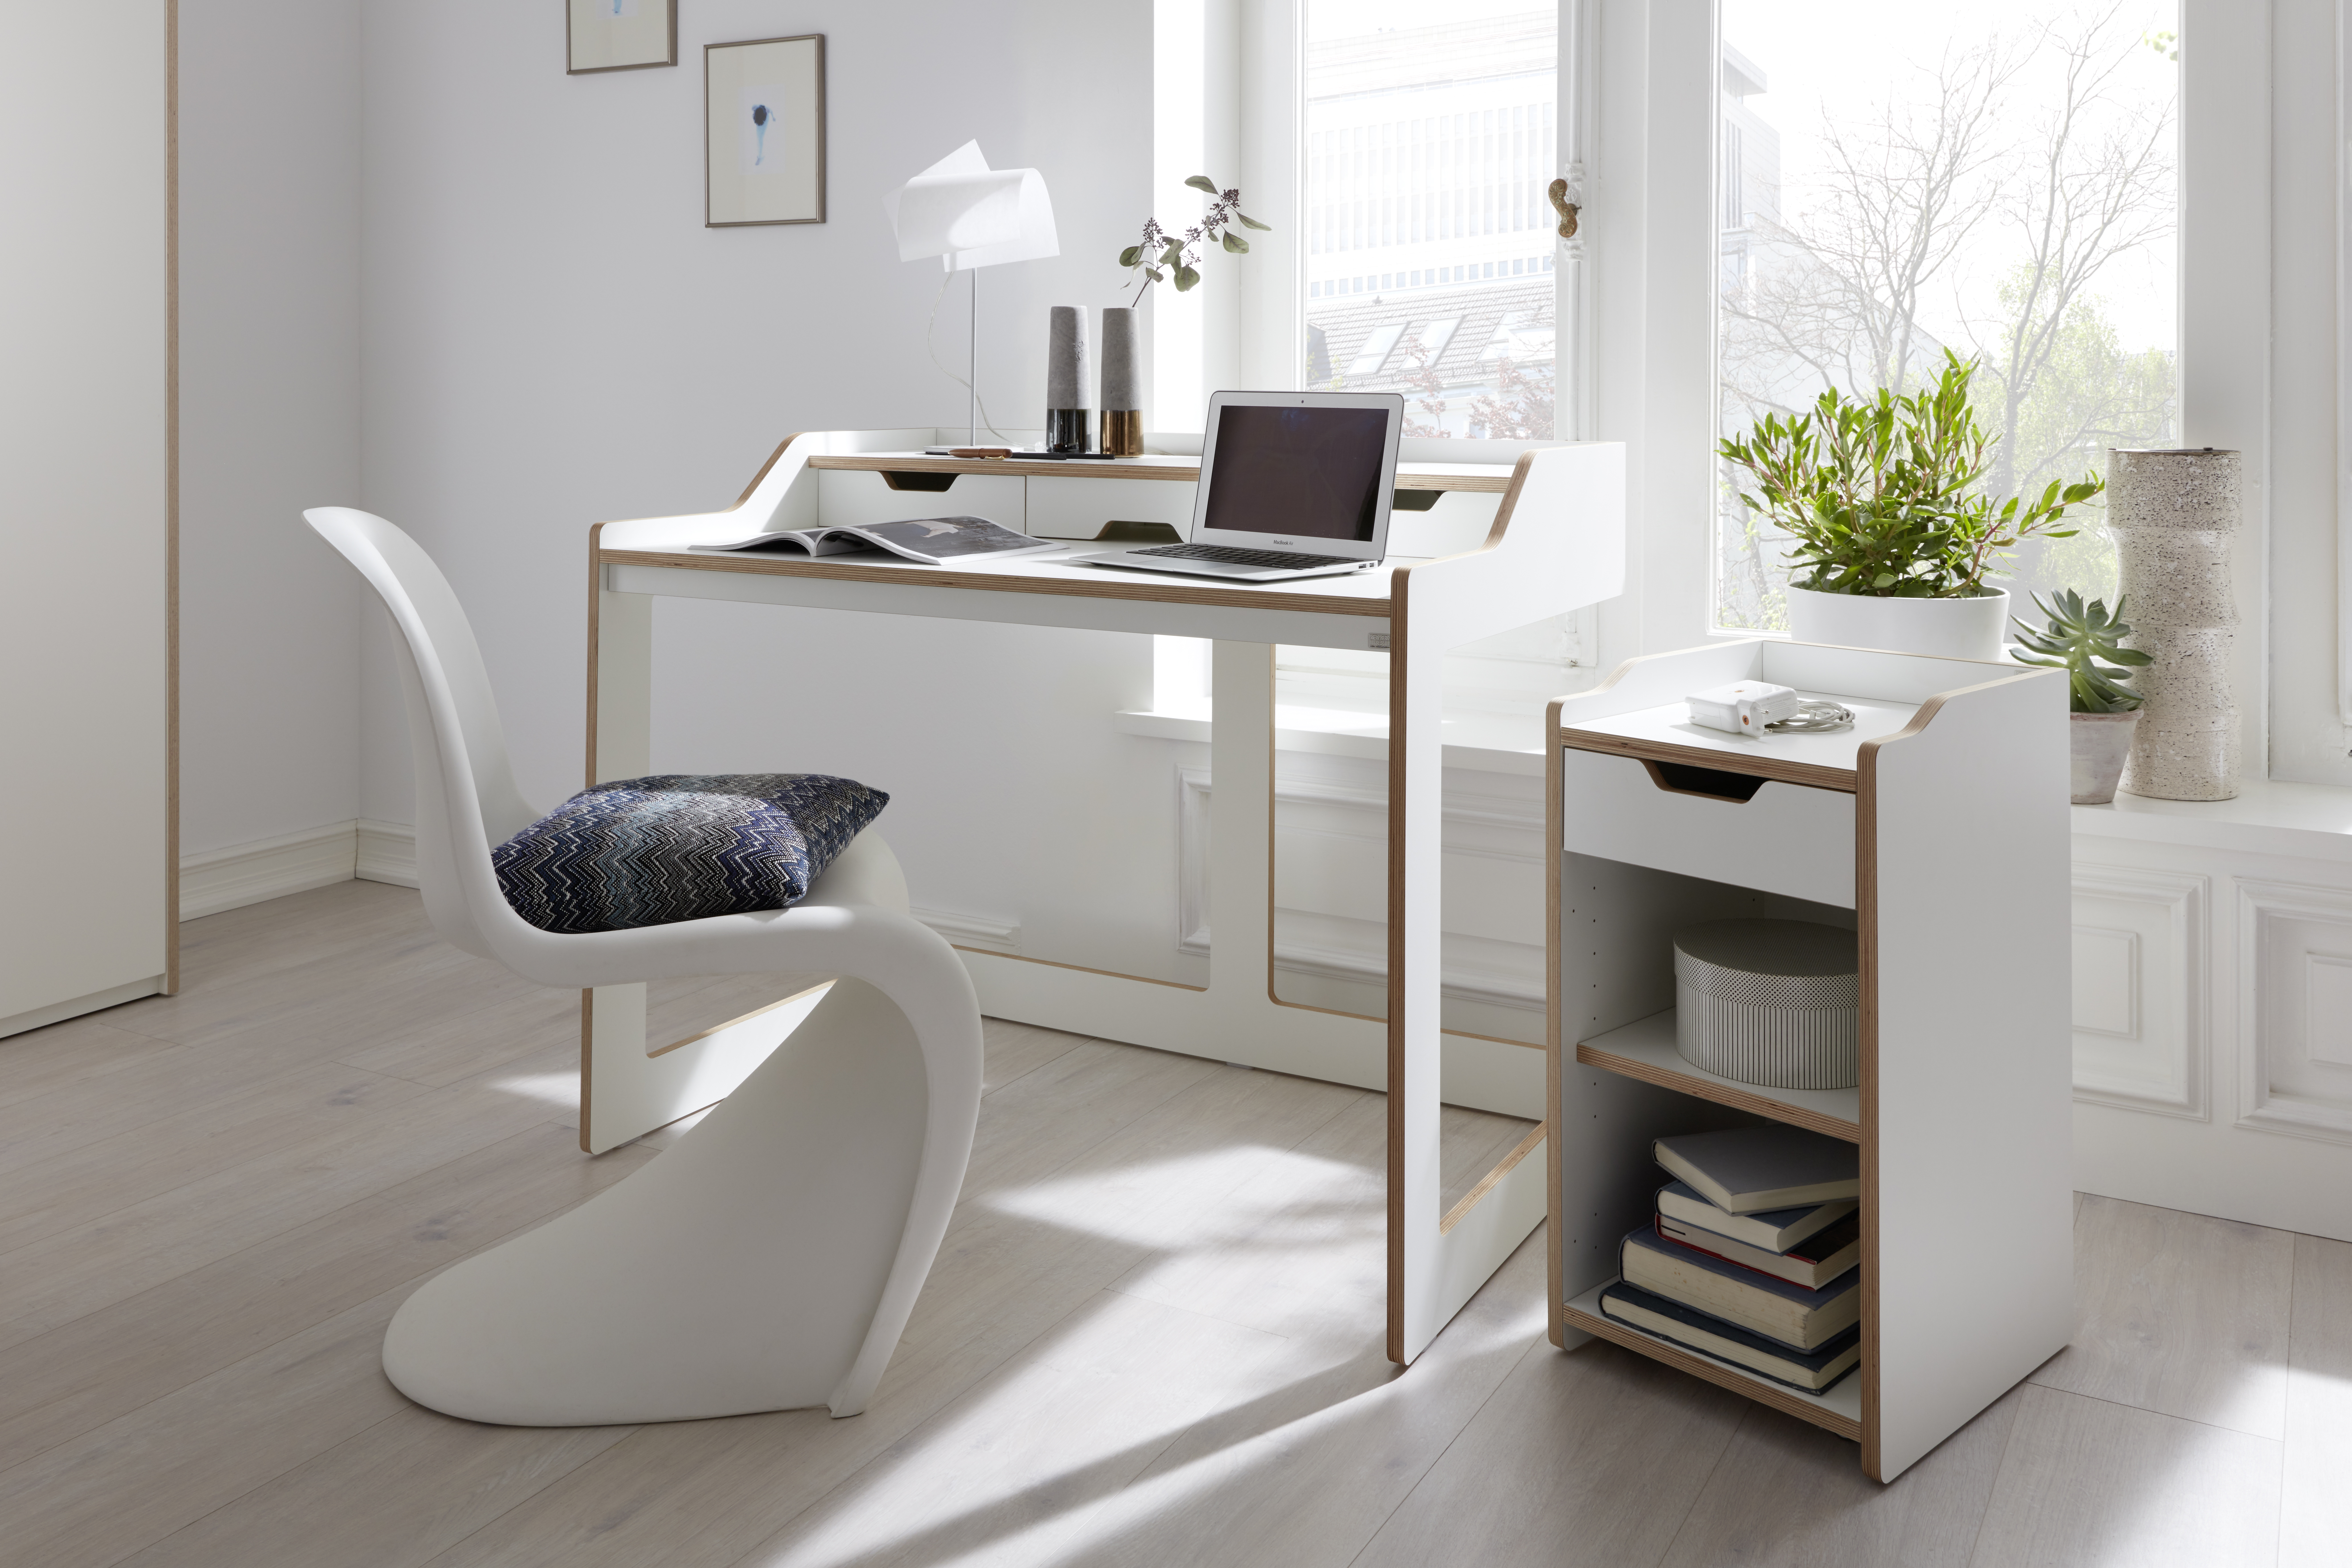 German Furniture for Small Spaces, Mueller Emform | Apartments USA Condos